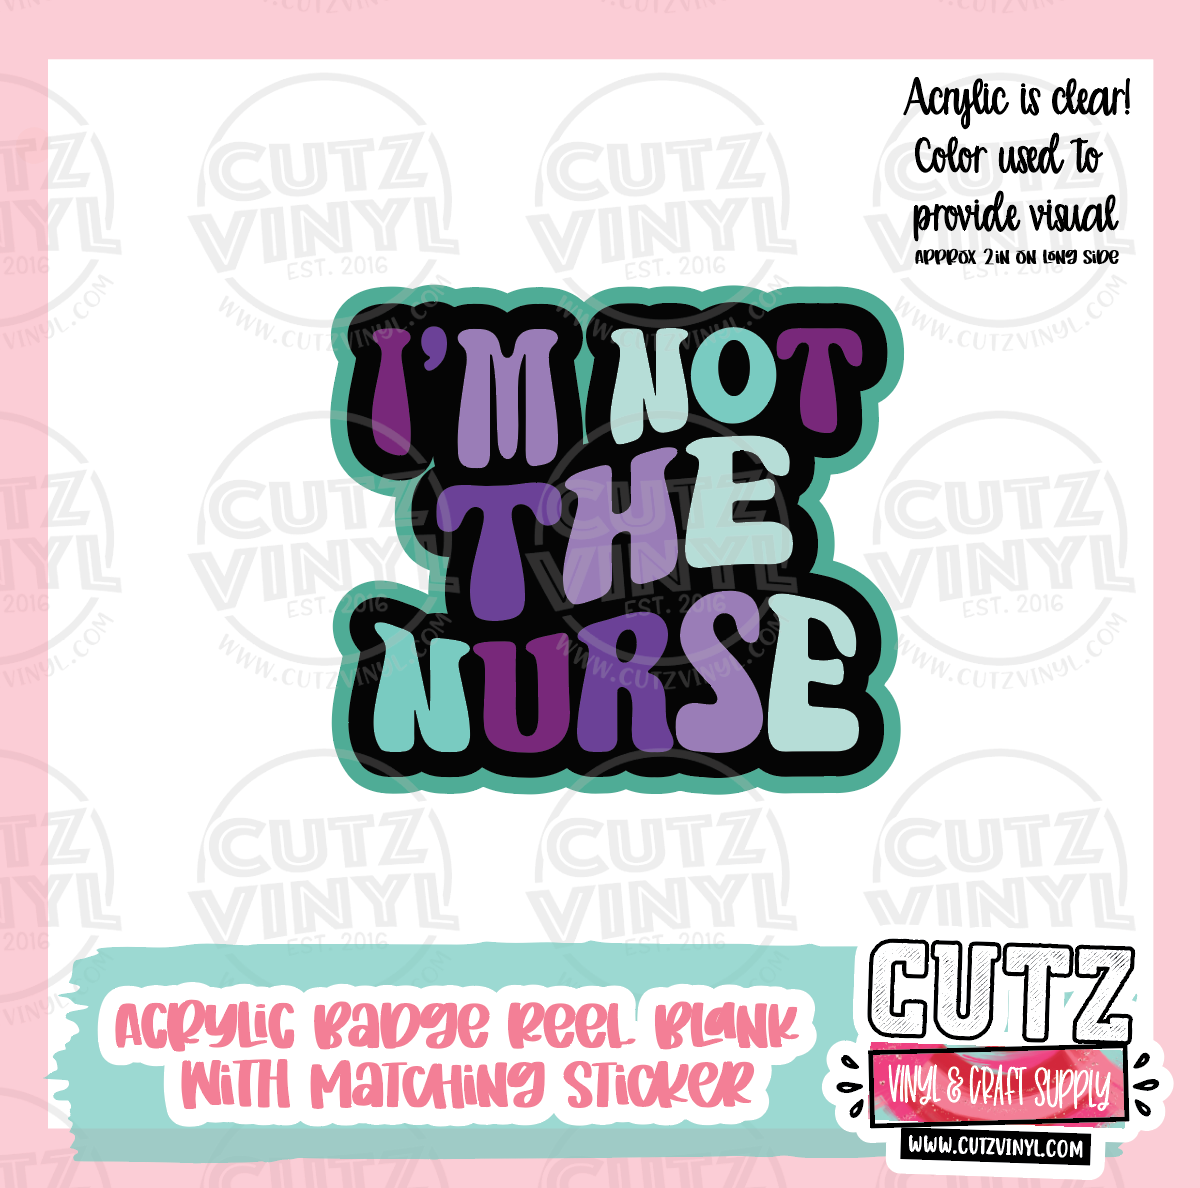 I'm Not The Nurse - Acrylic Badge Reel Blank and Matching Sticker